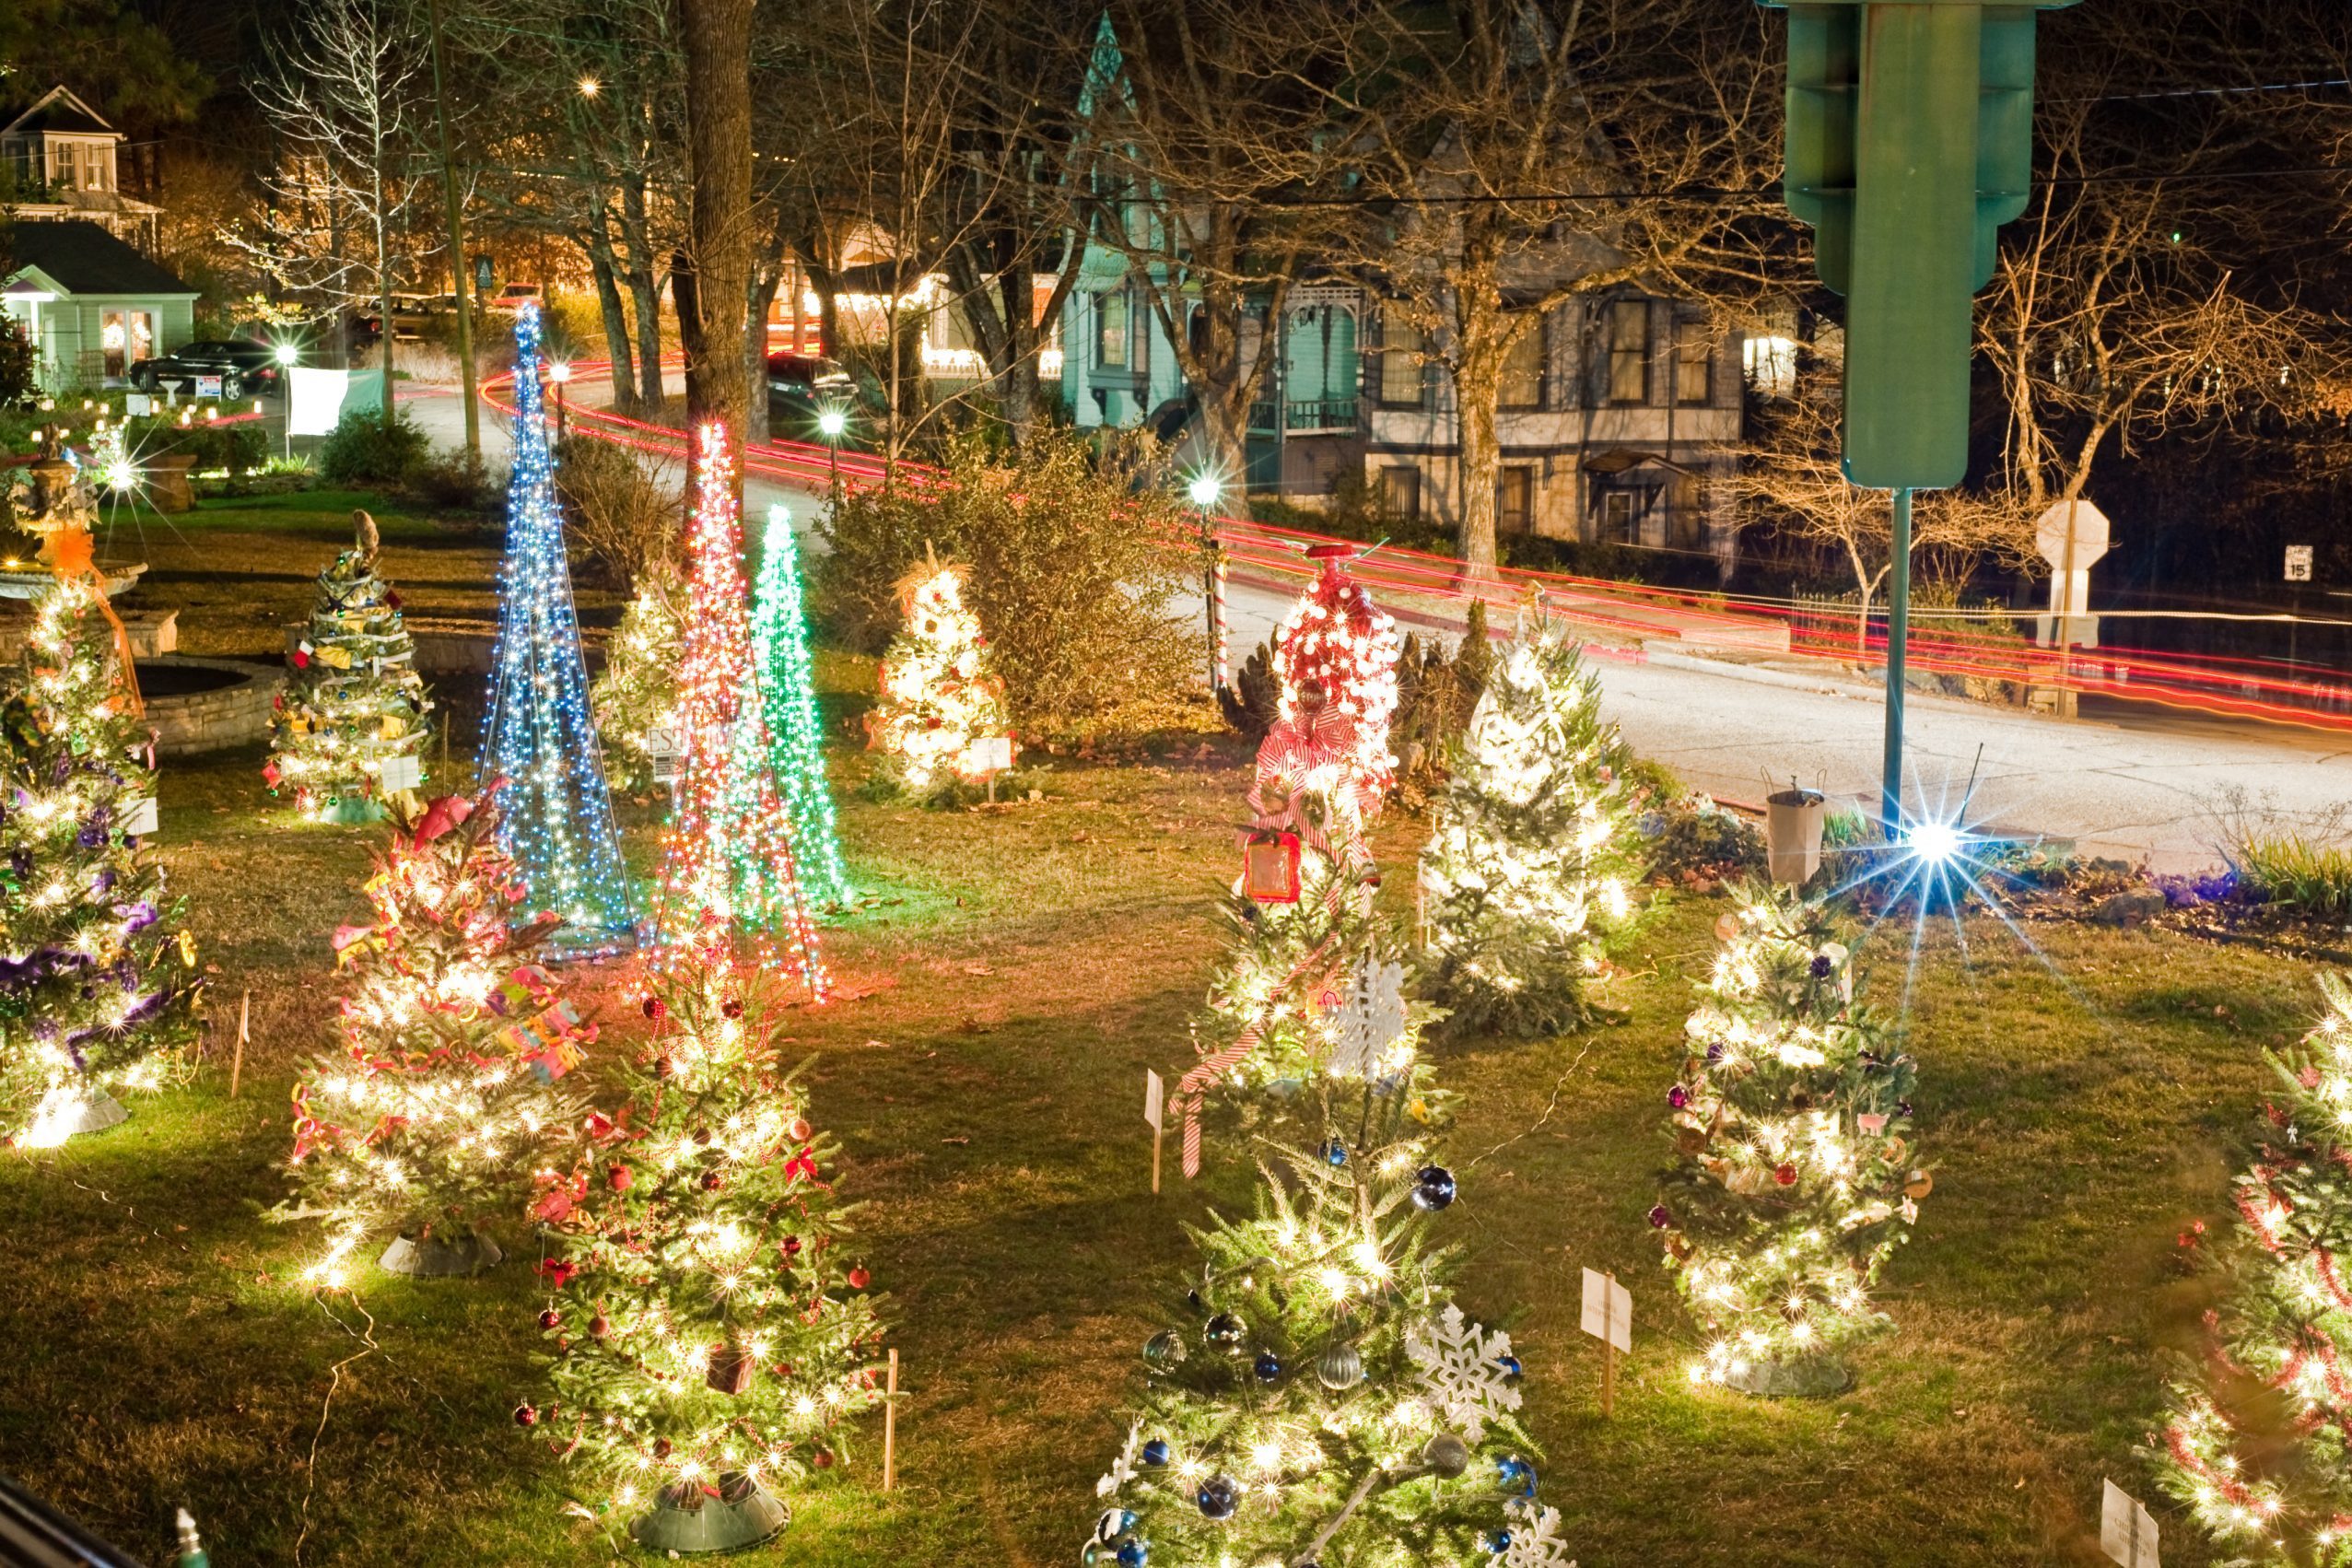 <p><strong>Best for:</strong> Christmas light forests</p> <p>This historic Ozark mountain village celebrates Christmas the old-fashioned way. Its charming downtown shopping district offers unique boutiques, art galleries, and craft shops for <a href="https://www.rd.com/list/christmas-gift-ideas-impossible-to-shop-for/">one-of-a-kind gifts</a>. Events include the Christmas Parade of Lights and a drive-through forest of over 300 trees and nativities scenes leading to the 67-foot tall Christ of the Ozarks statue. The 1886 Crescent Hotel gets into the holiday spirit with Christmas at the Crescent, featuring its own Christmas Tree Forest of lit-up arbors on its 15-acre grounds, sleigh rides, ice skating, s'mores around the campfire, and more.</p> <p>With so many holiday happenings at the Crescent Hotel, it makes sense to stay right where the action is. Overlooking the village itself, the historic Crescent offers amazing views of the Ozark Mountains and luxury amenities for affordable prices.</p> <p class="listicle-page__cta-button-shop"><a class="shop-btn" href="https://www.tripadvisor.com/Hotel_Review-g31582-d76931-Reviews-1886_Crescent_Hotel_Spa-Eureka_Springs_Arkansas.html">Book Now</a></p>